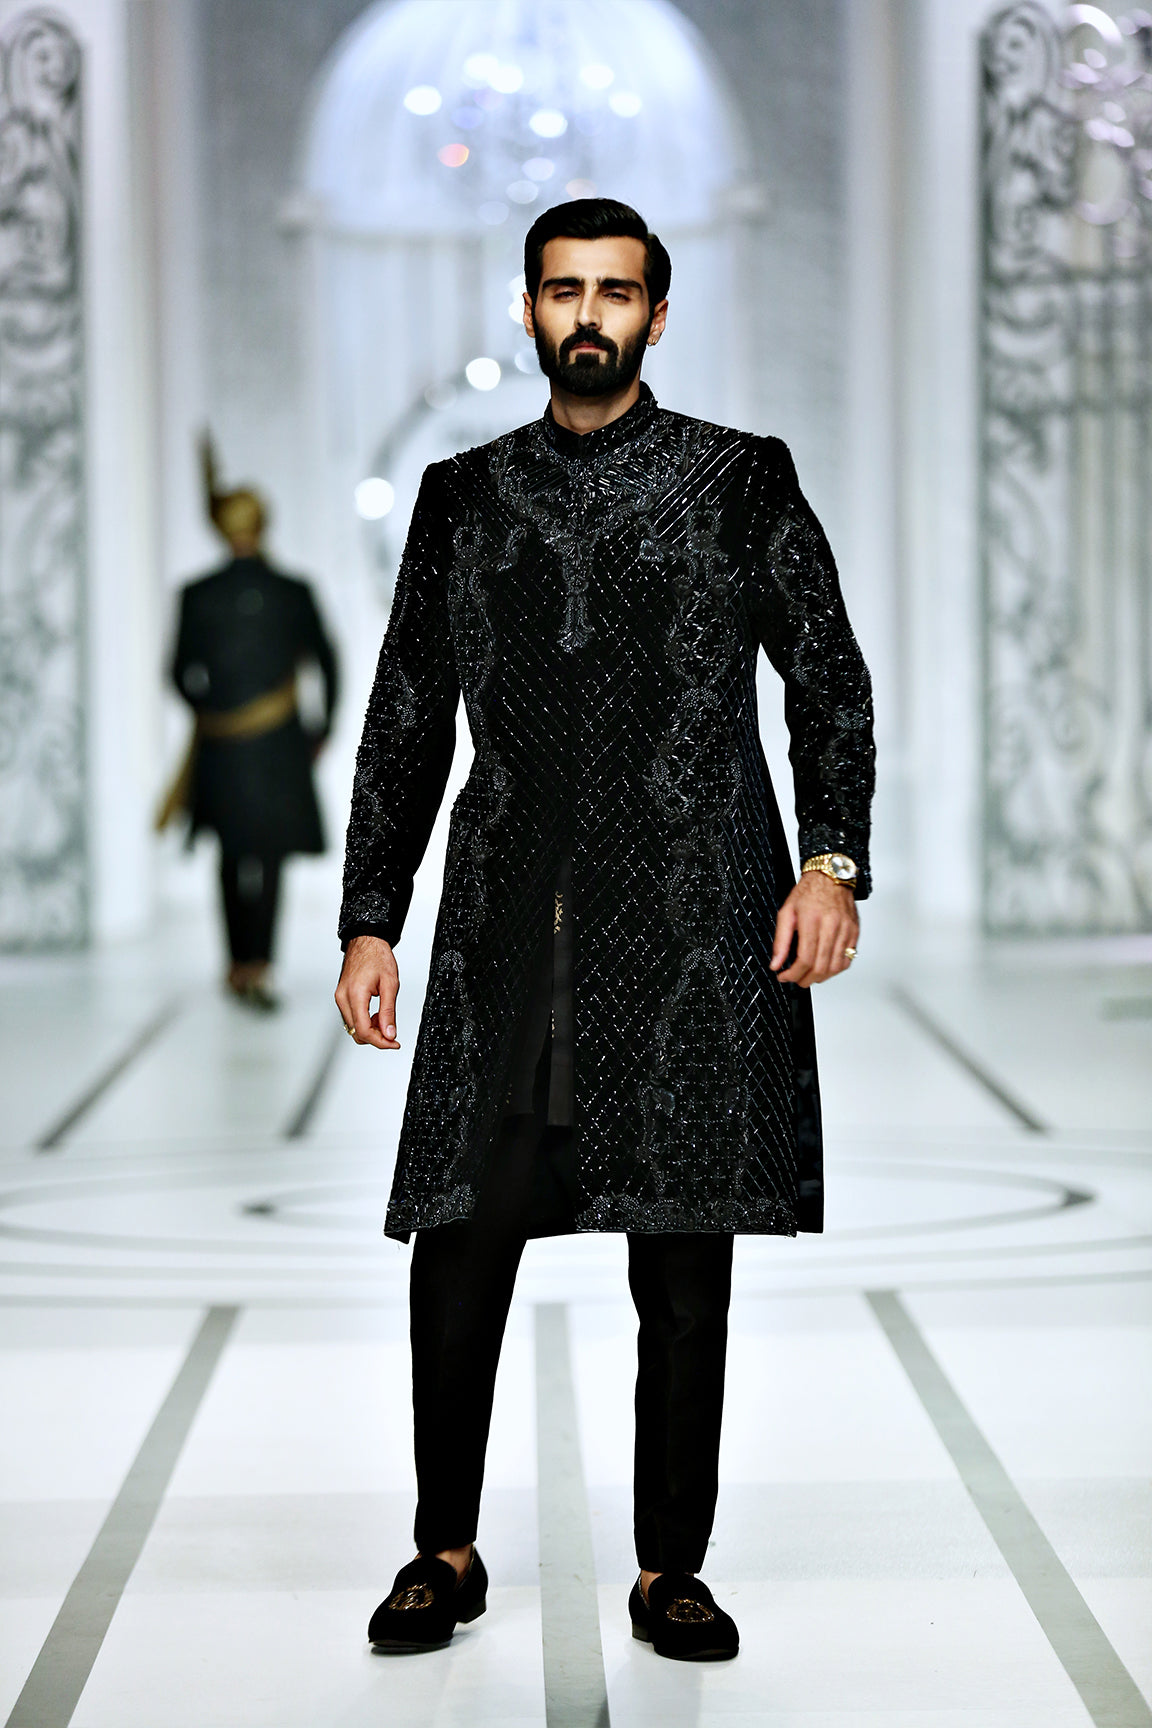 BCW 41: Hand-Worked Lehri Black Solitaire Sherwani - Elevate Your Wedding Style with Pure Shine